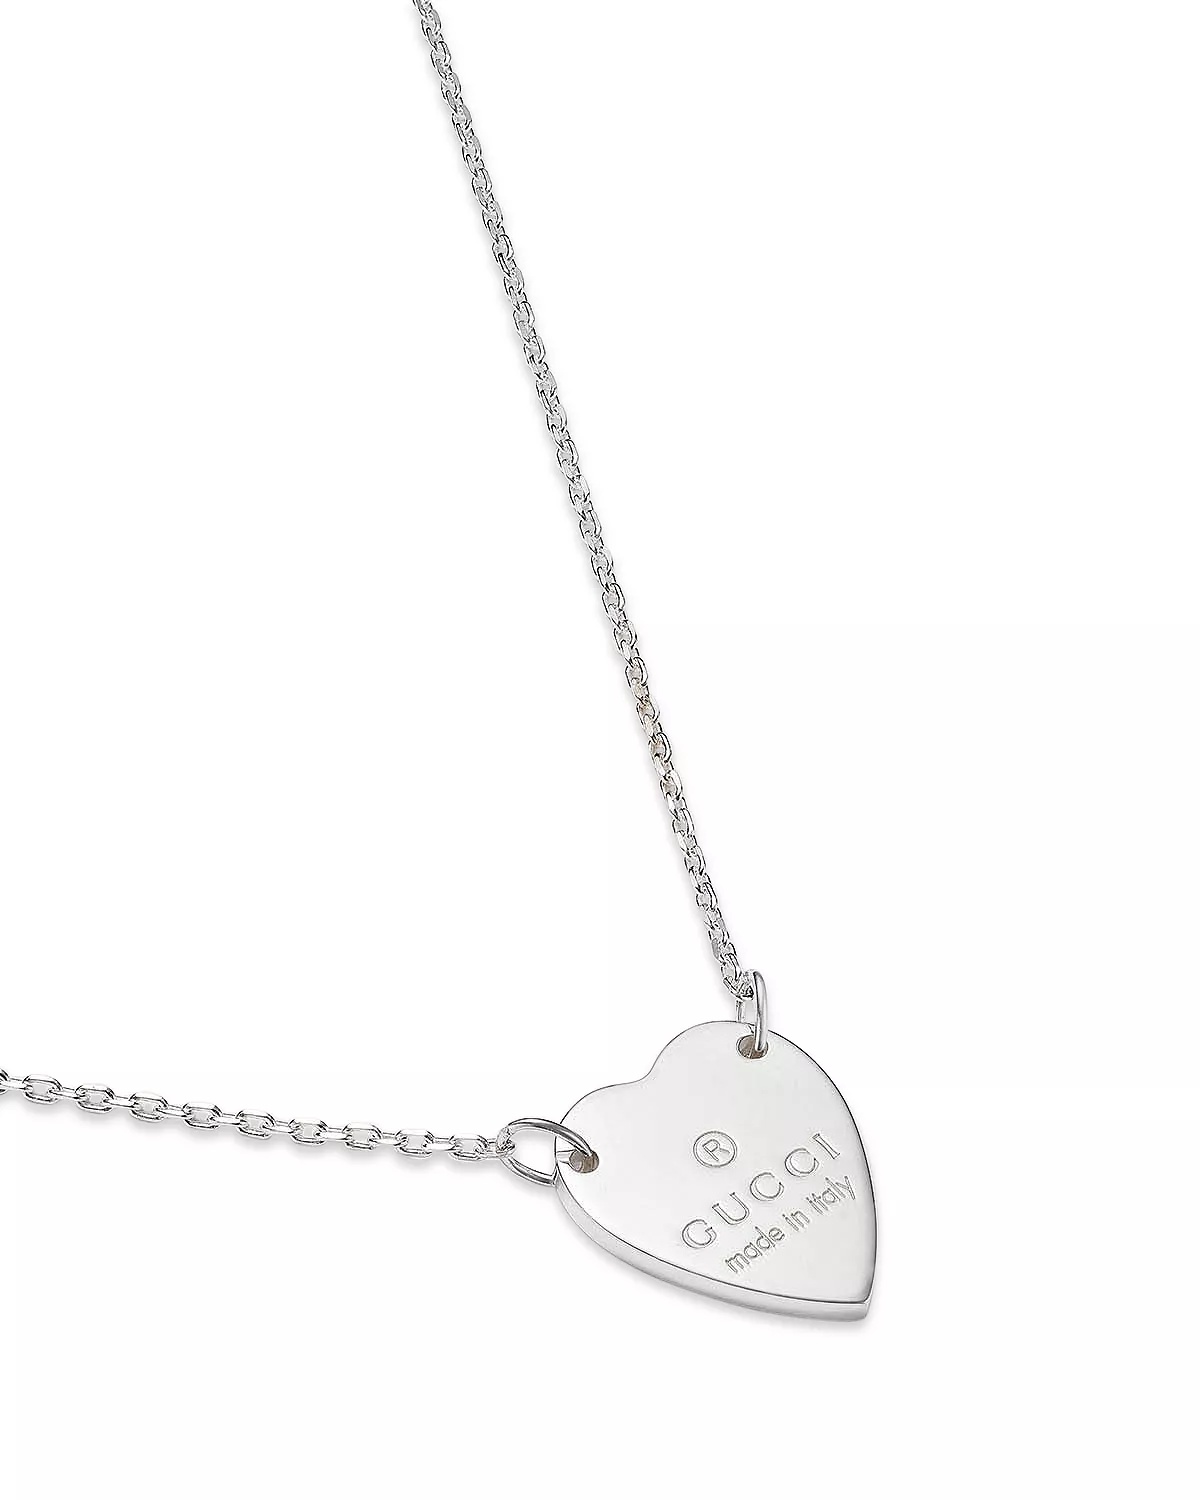 Sterling Silver Engraved Trademark Heart Necklace, 18" - 4